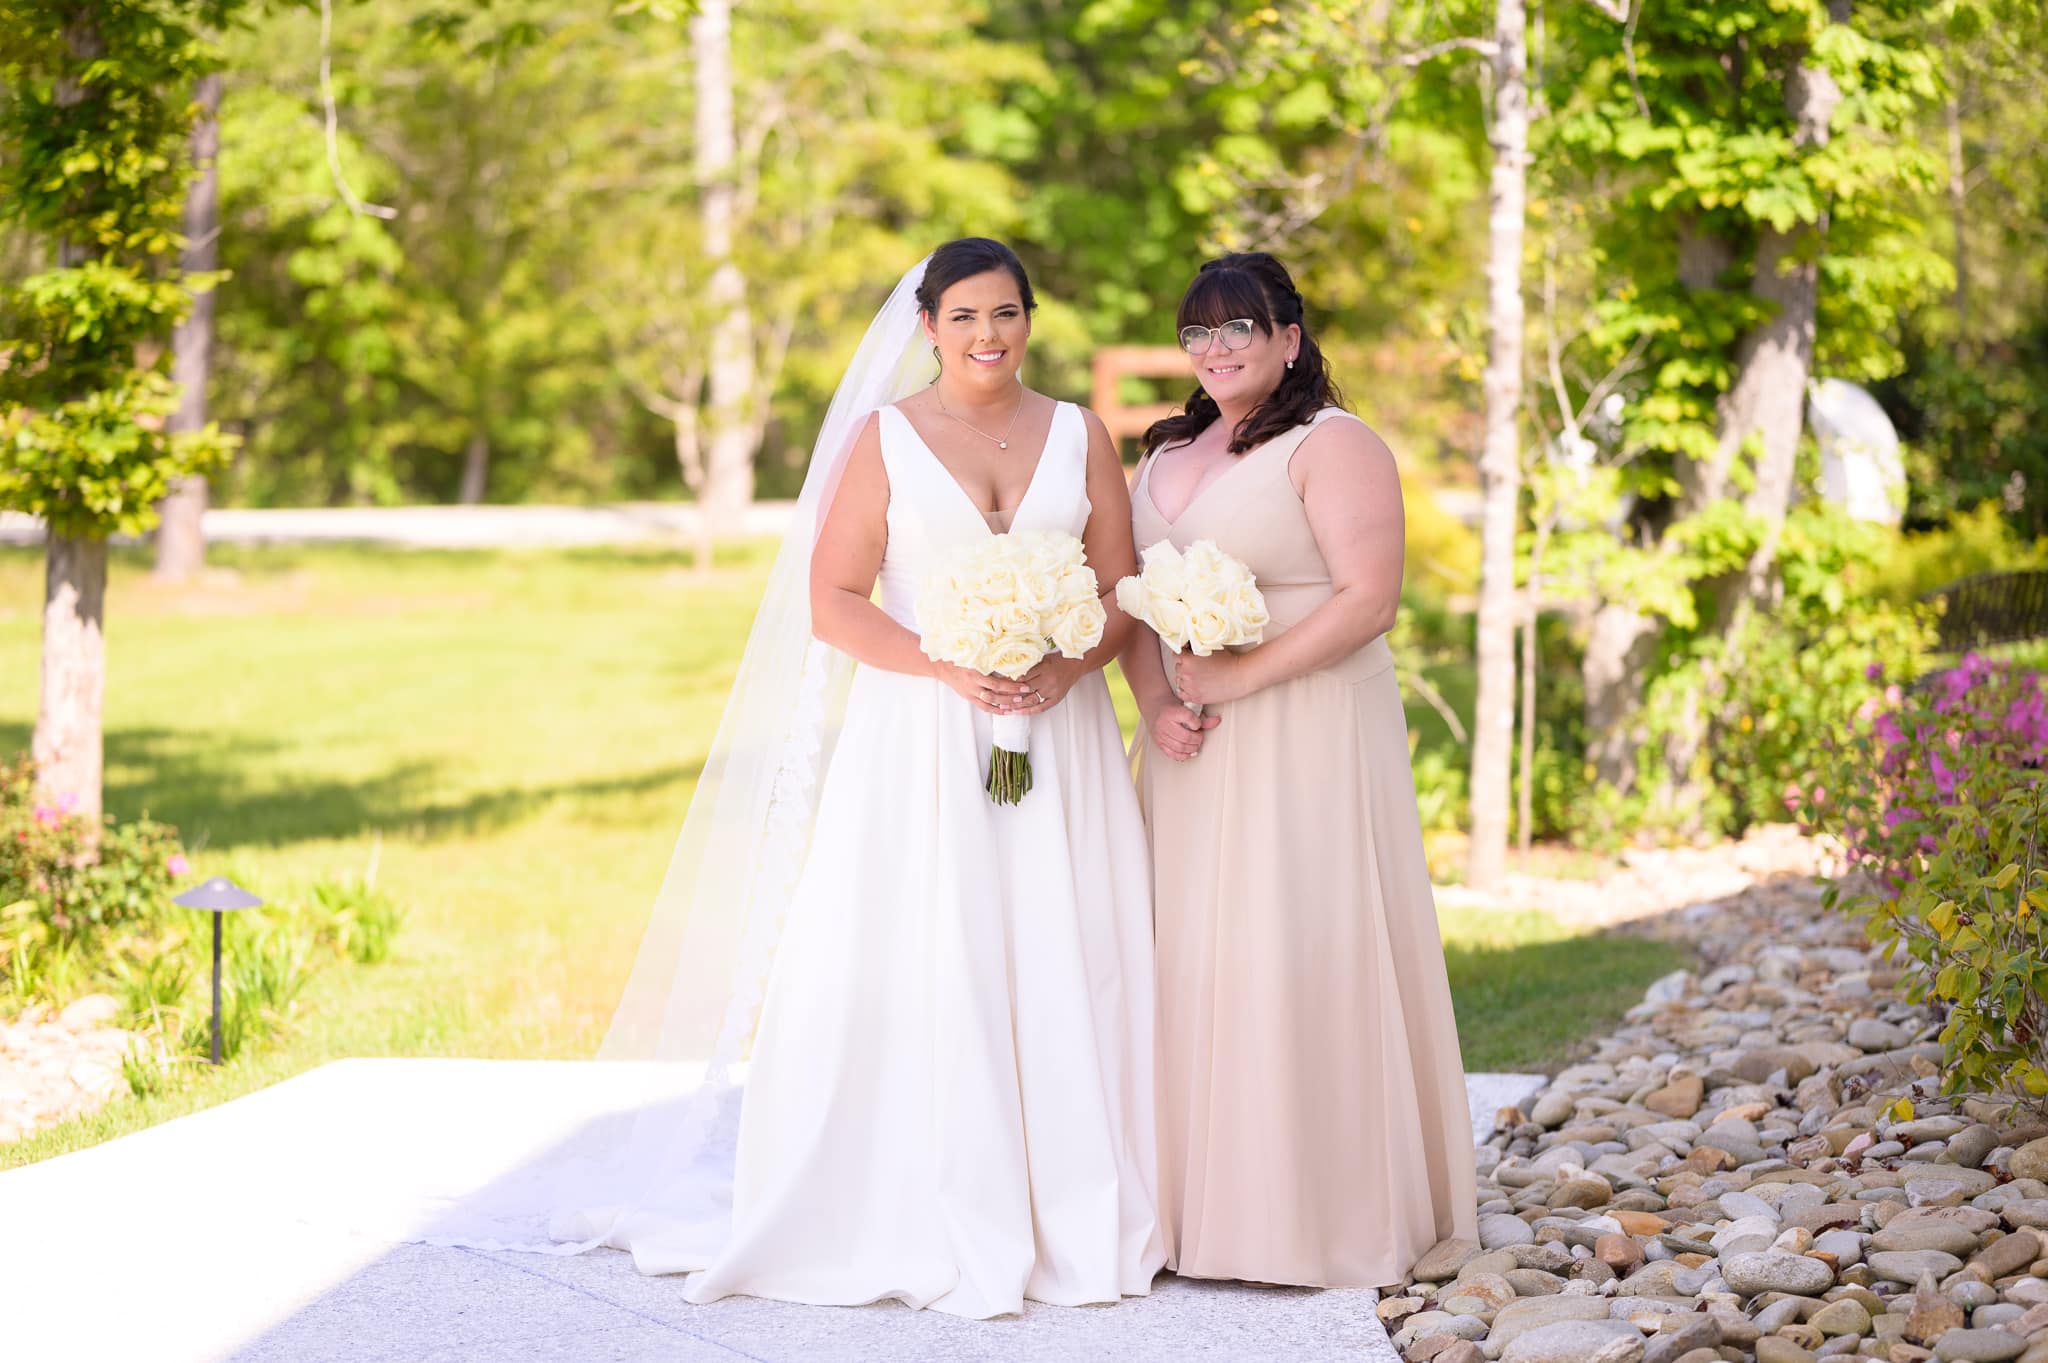 Bride and sister before the wedding - The Venue at White Oaks Farm